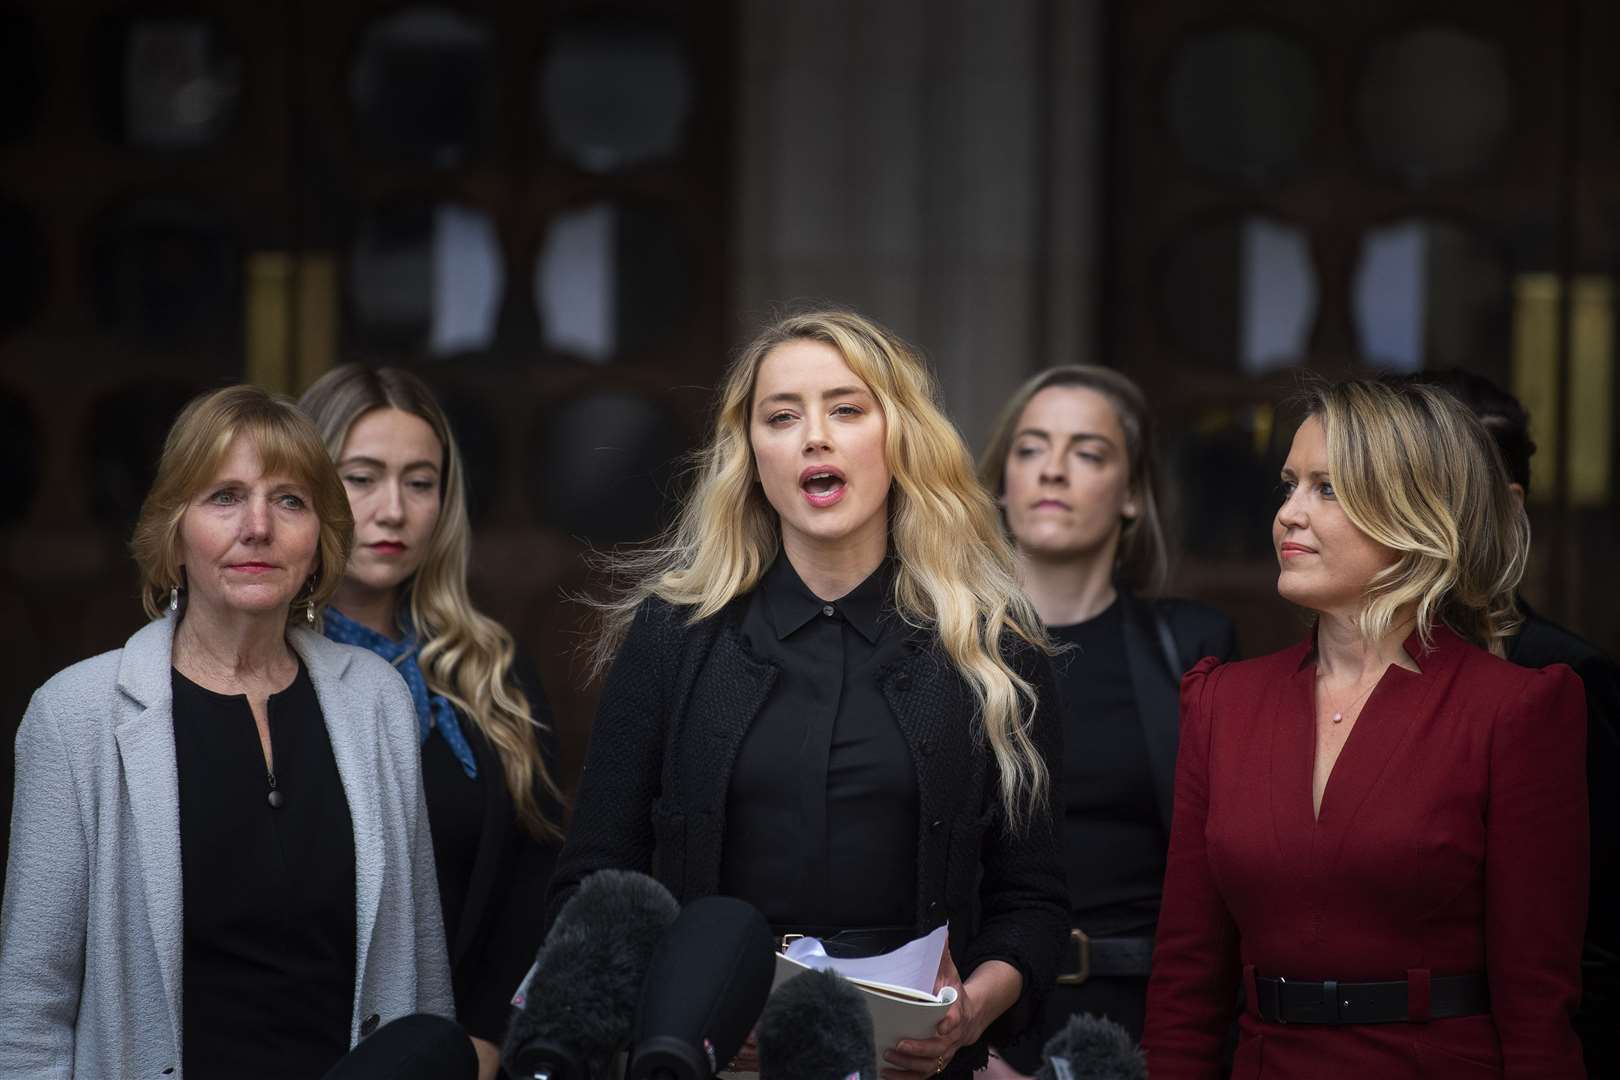 Actress Amber Heard made a statement on the steps of the Royal Courts of Justice in London on the final day of the trial (Victoria Jones/PA)